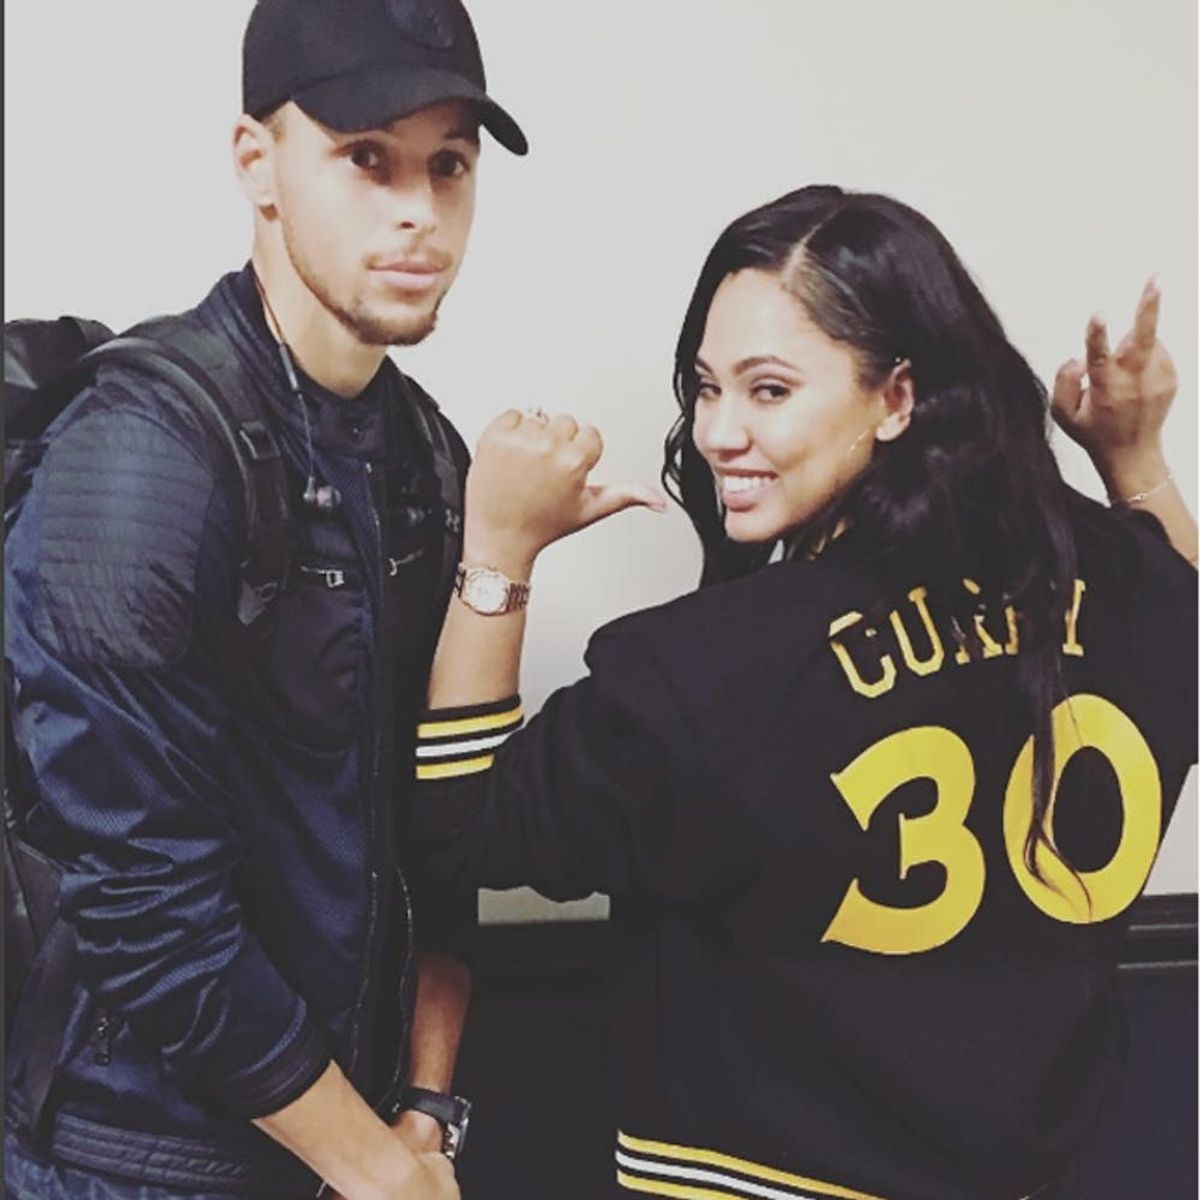 5 Stylish Ways Celebs Have Shown Love for Their Boo